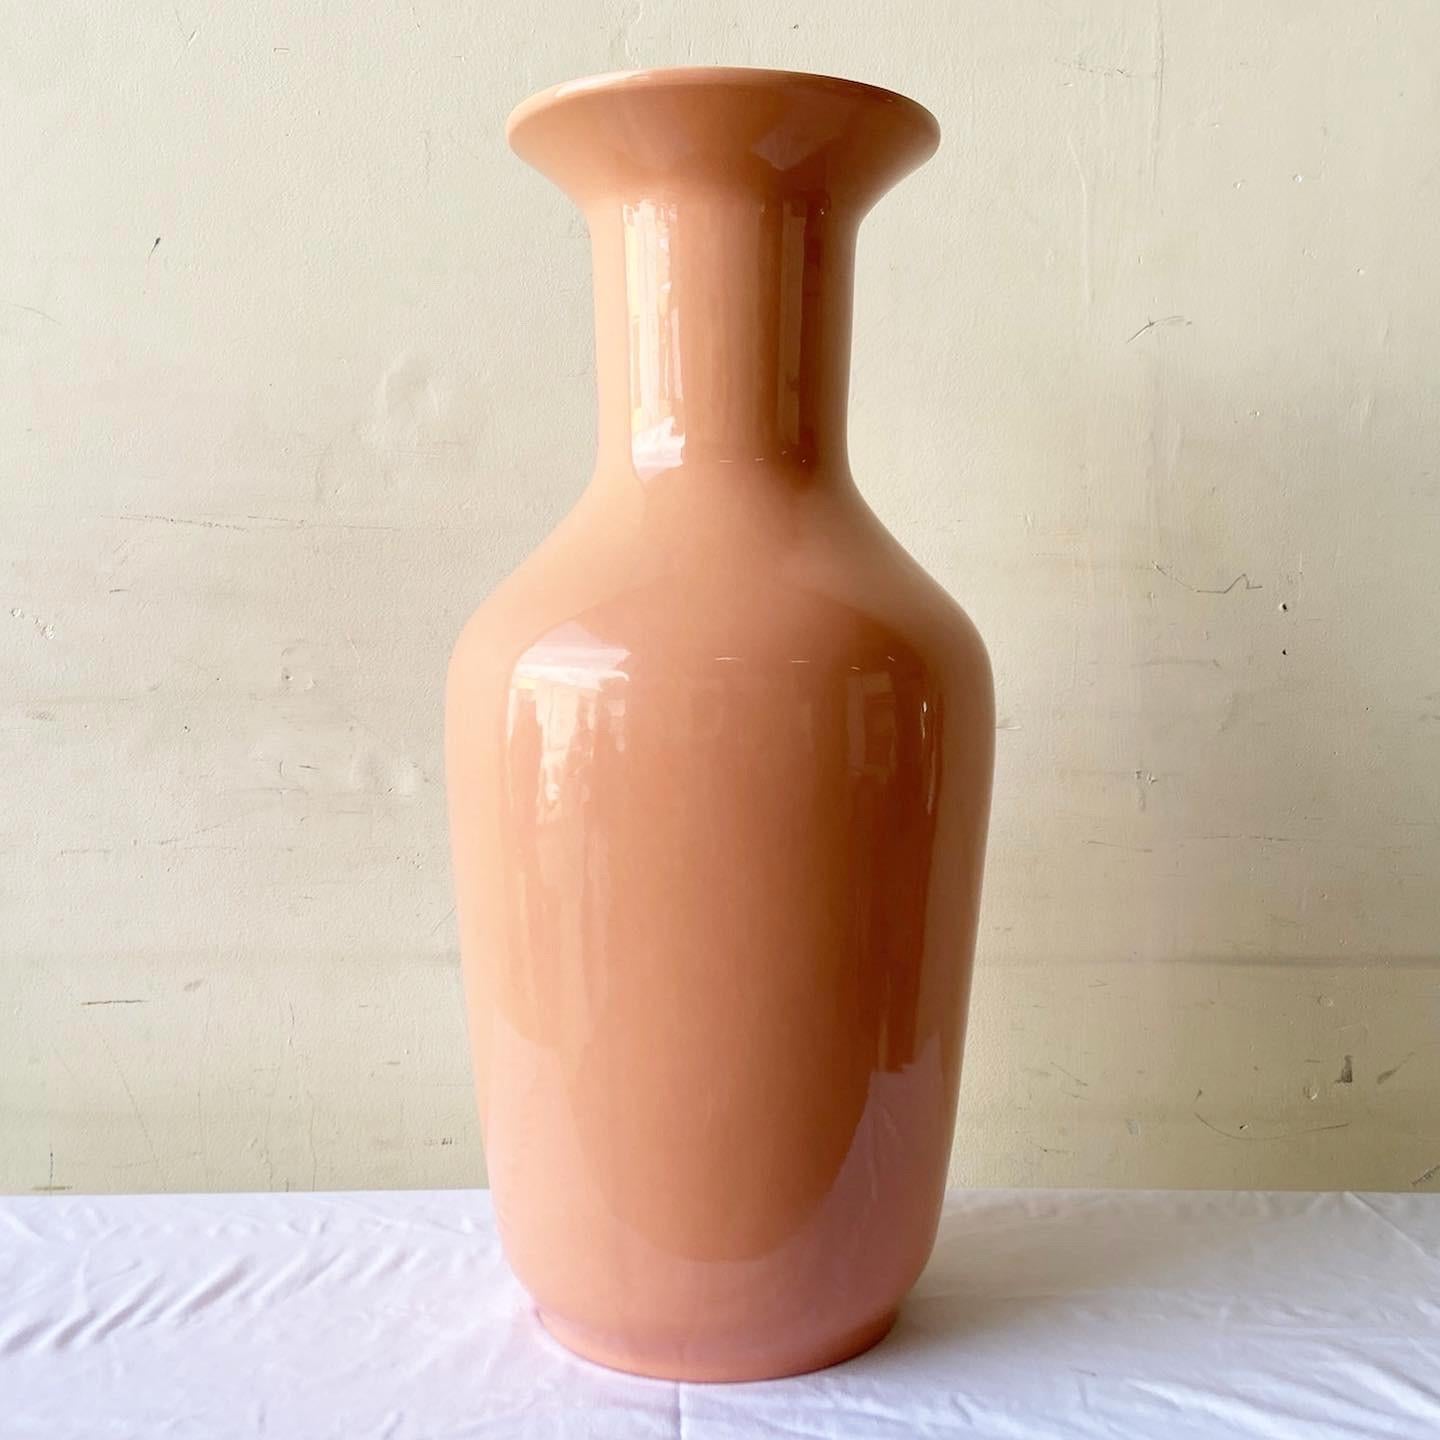 Incredible postmodern ceramic floor vase. Features a glossy peachy pink finish.

Additional Information:
Material: Ceramic
Color: Pink
Style: Postmodern
Time Period: 1980s
Place of origin: USA
Dimension: 11